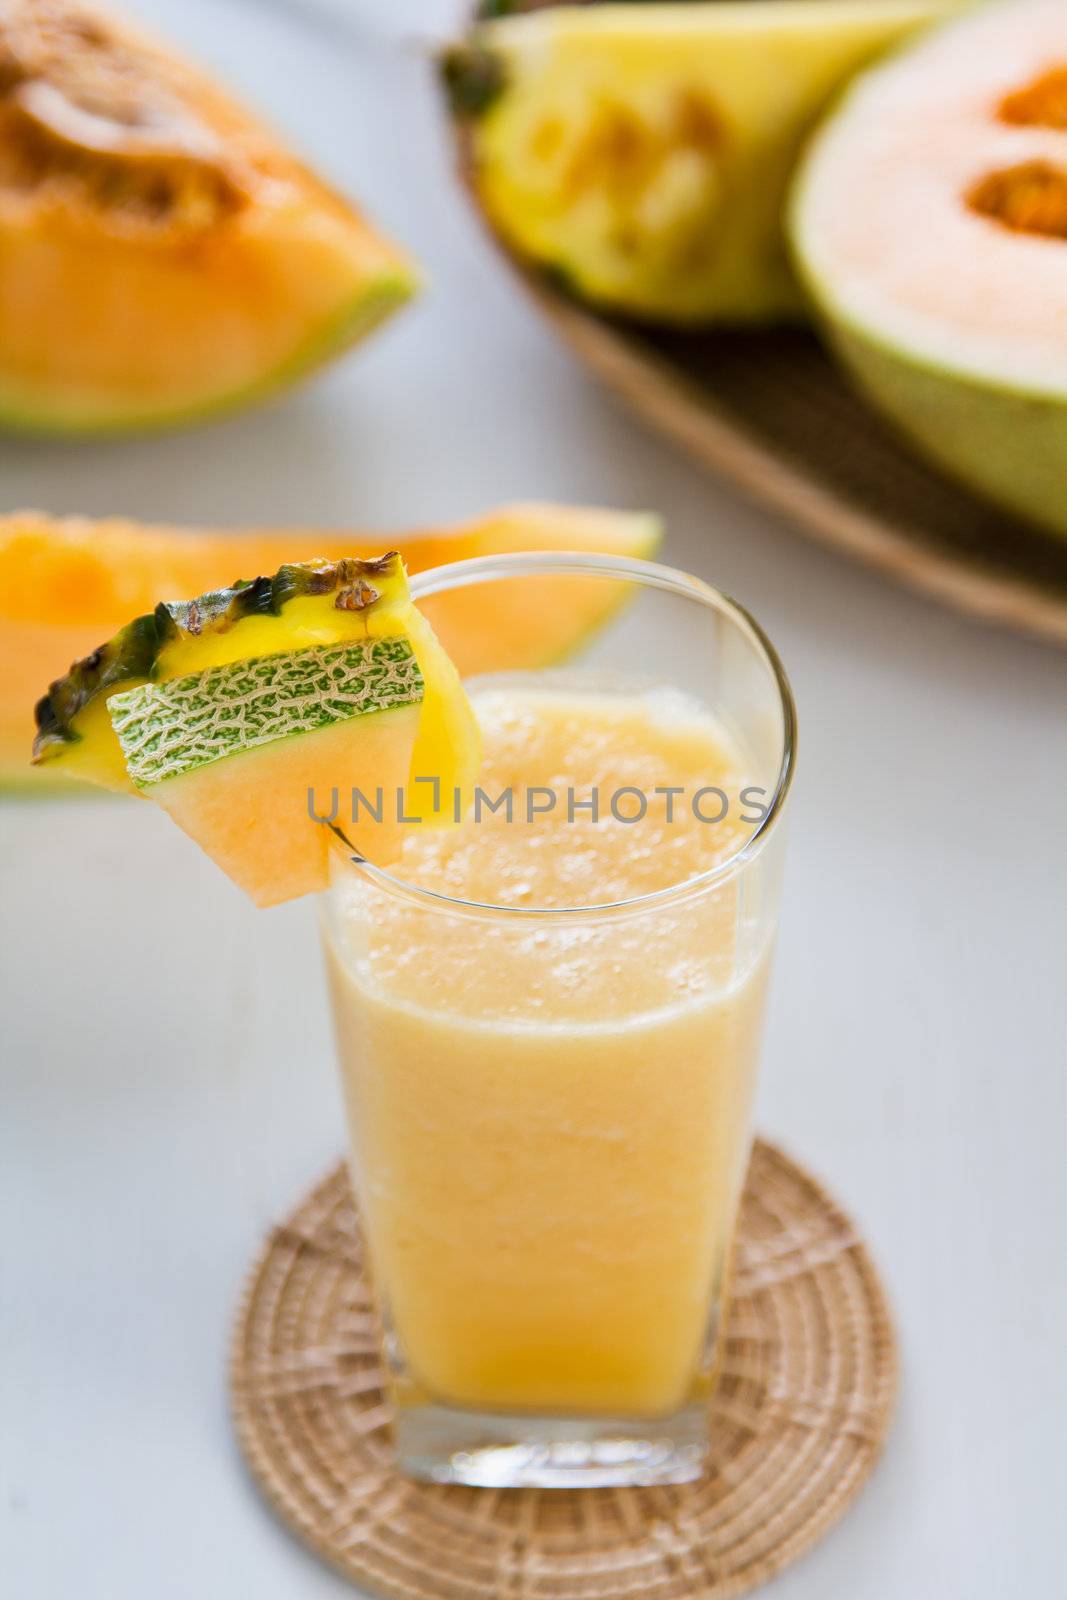 Cantaloupe and Pineapple smoothie by some fresh cantaloupe and pineapple